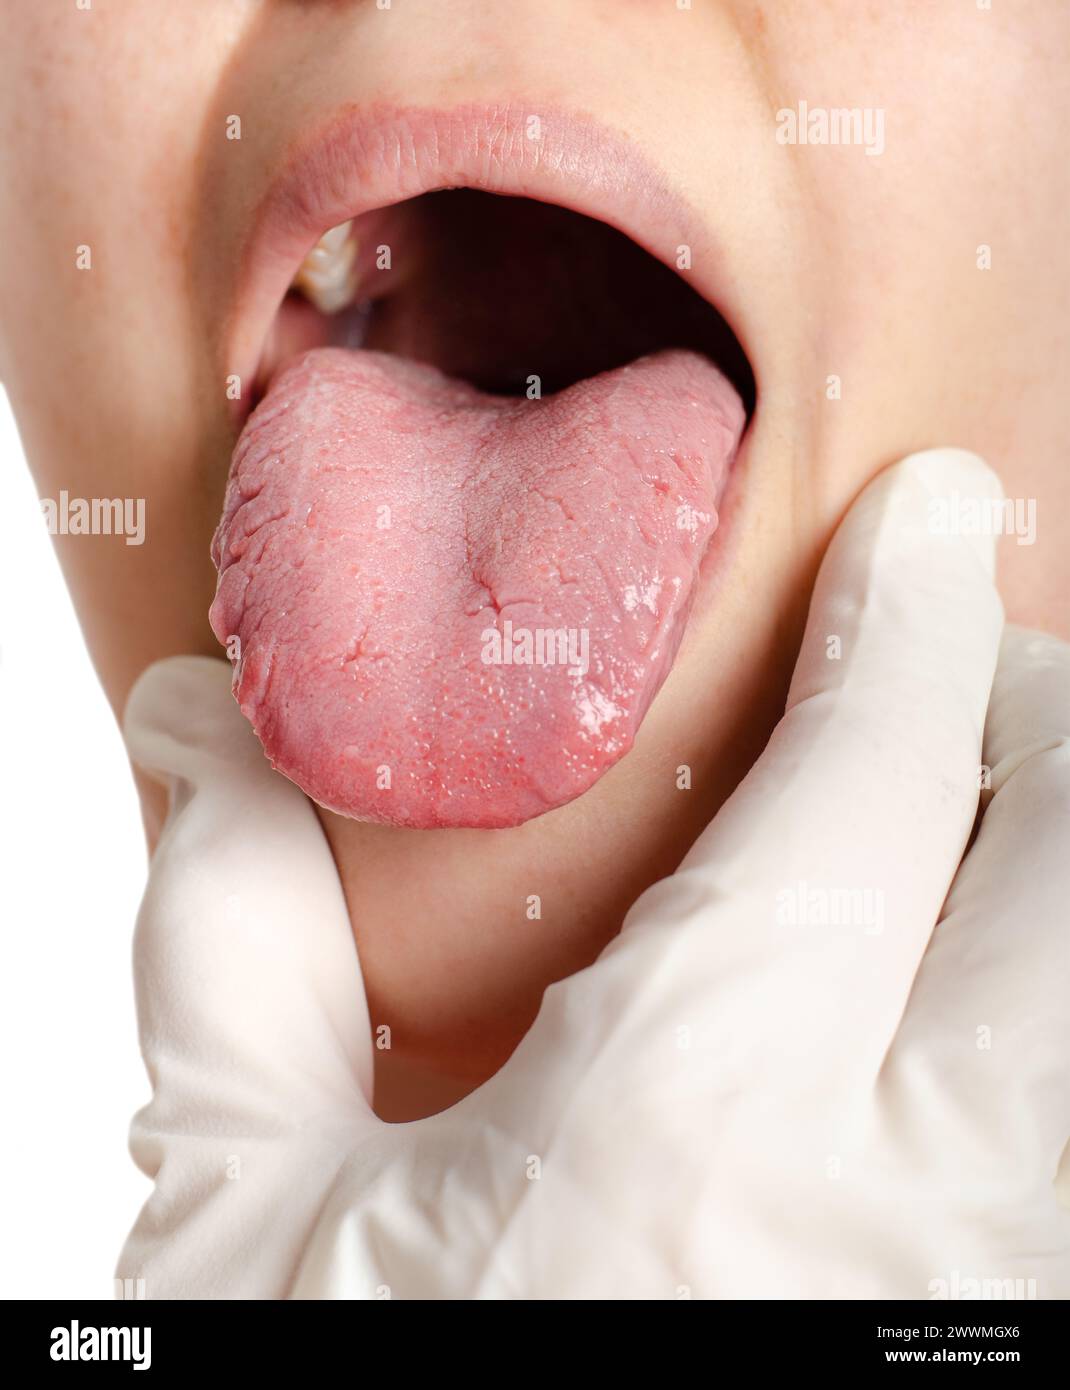 Woman with geographical tongue. Migratory glossitis. Stock Photo